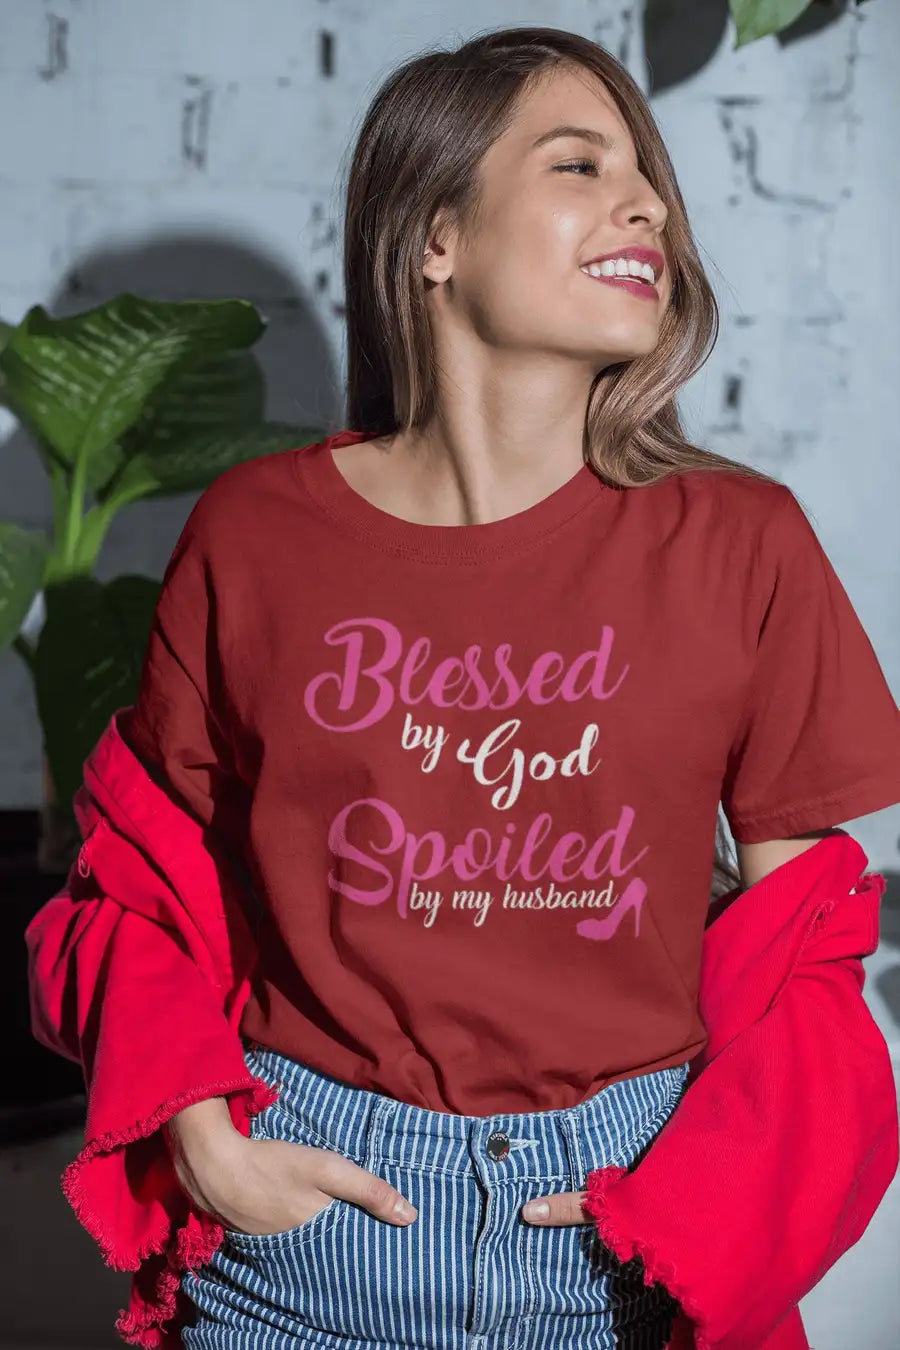 Blessed By God Coloured Multi T Shirt for Married Women | Premium Design | Catch My Drift India - Catch My Drift India Clothing blessed by god yellow, blue, clothing, code, made in india, mom